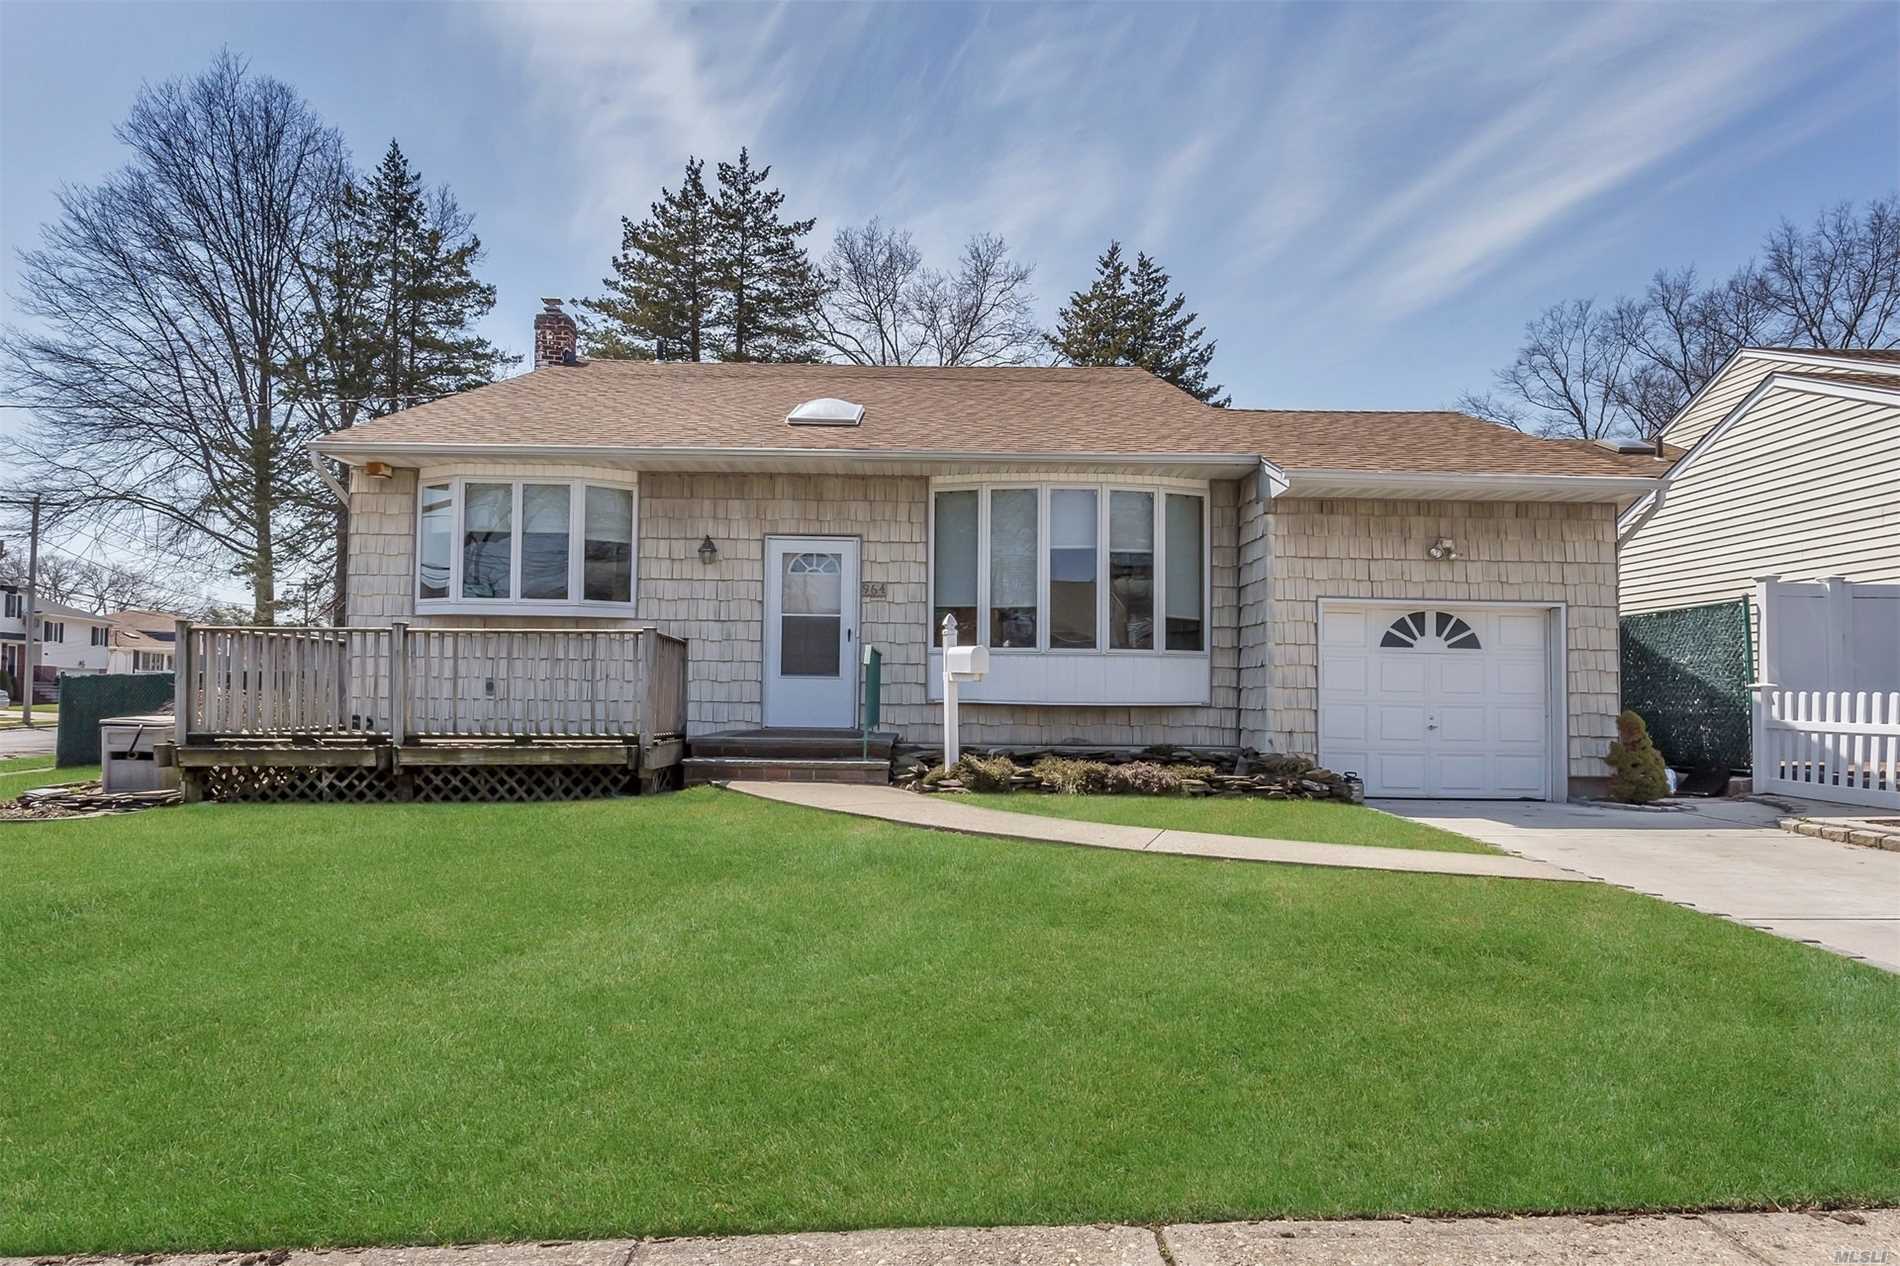 Move-In Cond 5 Bdrm 2 Bath Updated Front To Back Split W/Full Basement! 5 Bdrm 2 Bath, Oak/Corian Eik, Fdr, Vaulted Lr, Hardwood Floors, 200 Amp, Cac, Gas Cooking And Heat, Igs, Whole House Water Filtration System. 1 Car Garage, Won&rsquo;t Last!!